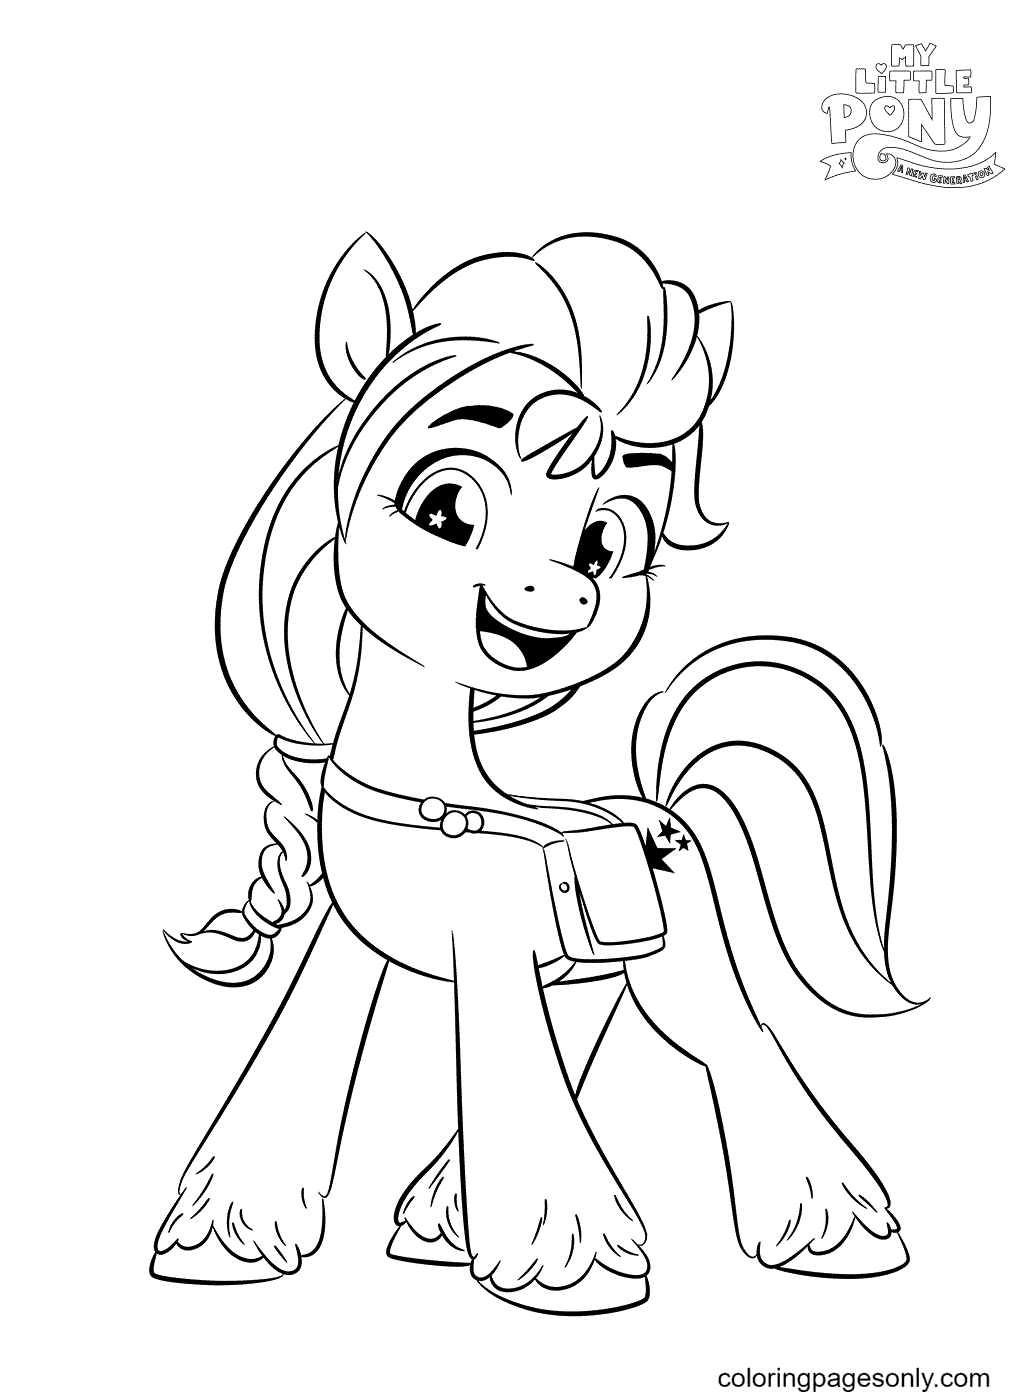 My Little Pony A New Generation Coloring Pages   Coloring Pages ...